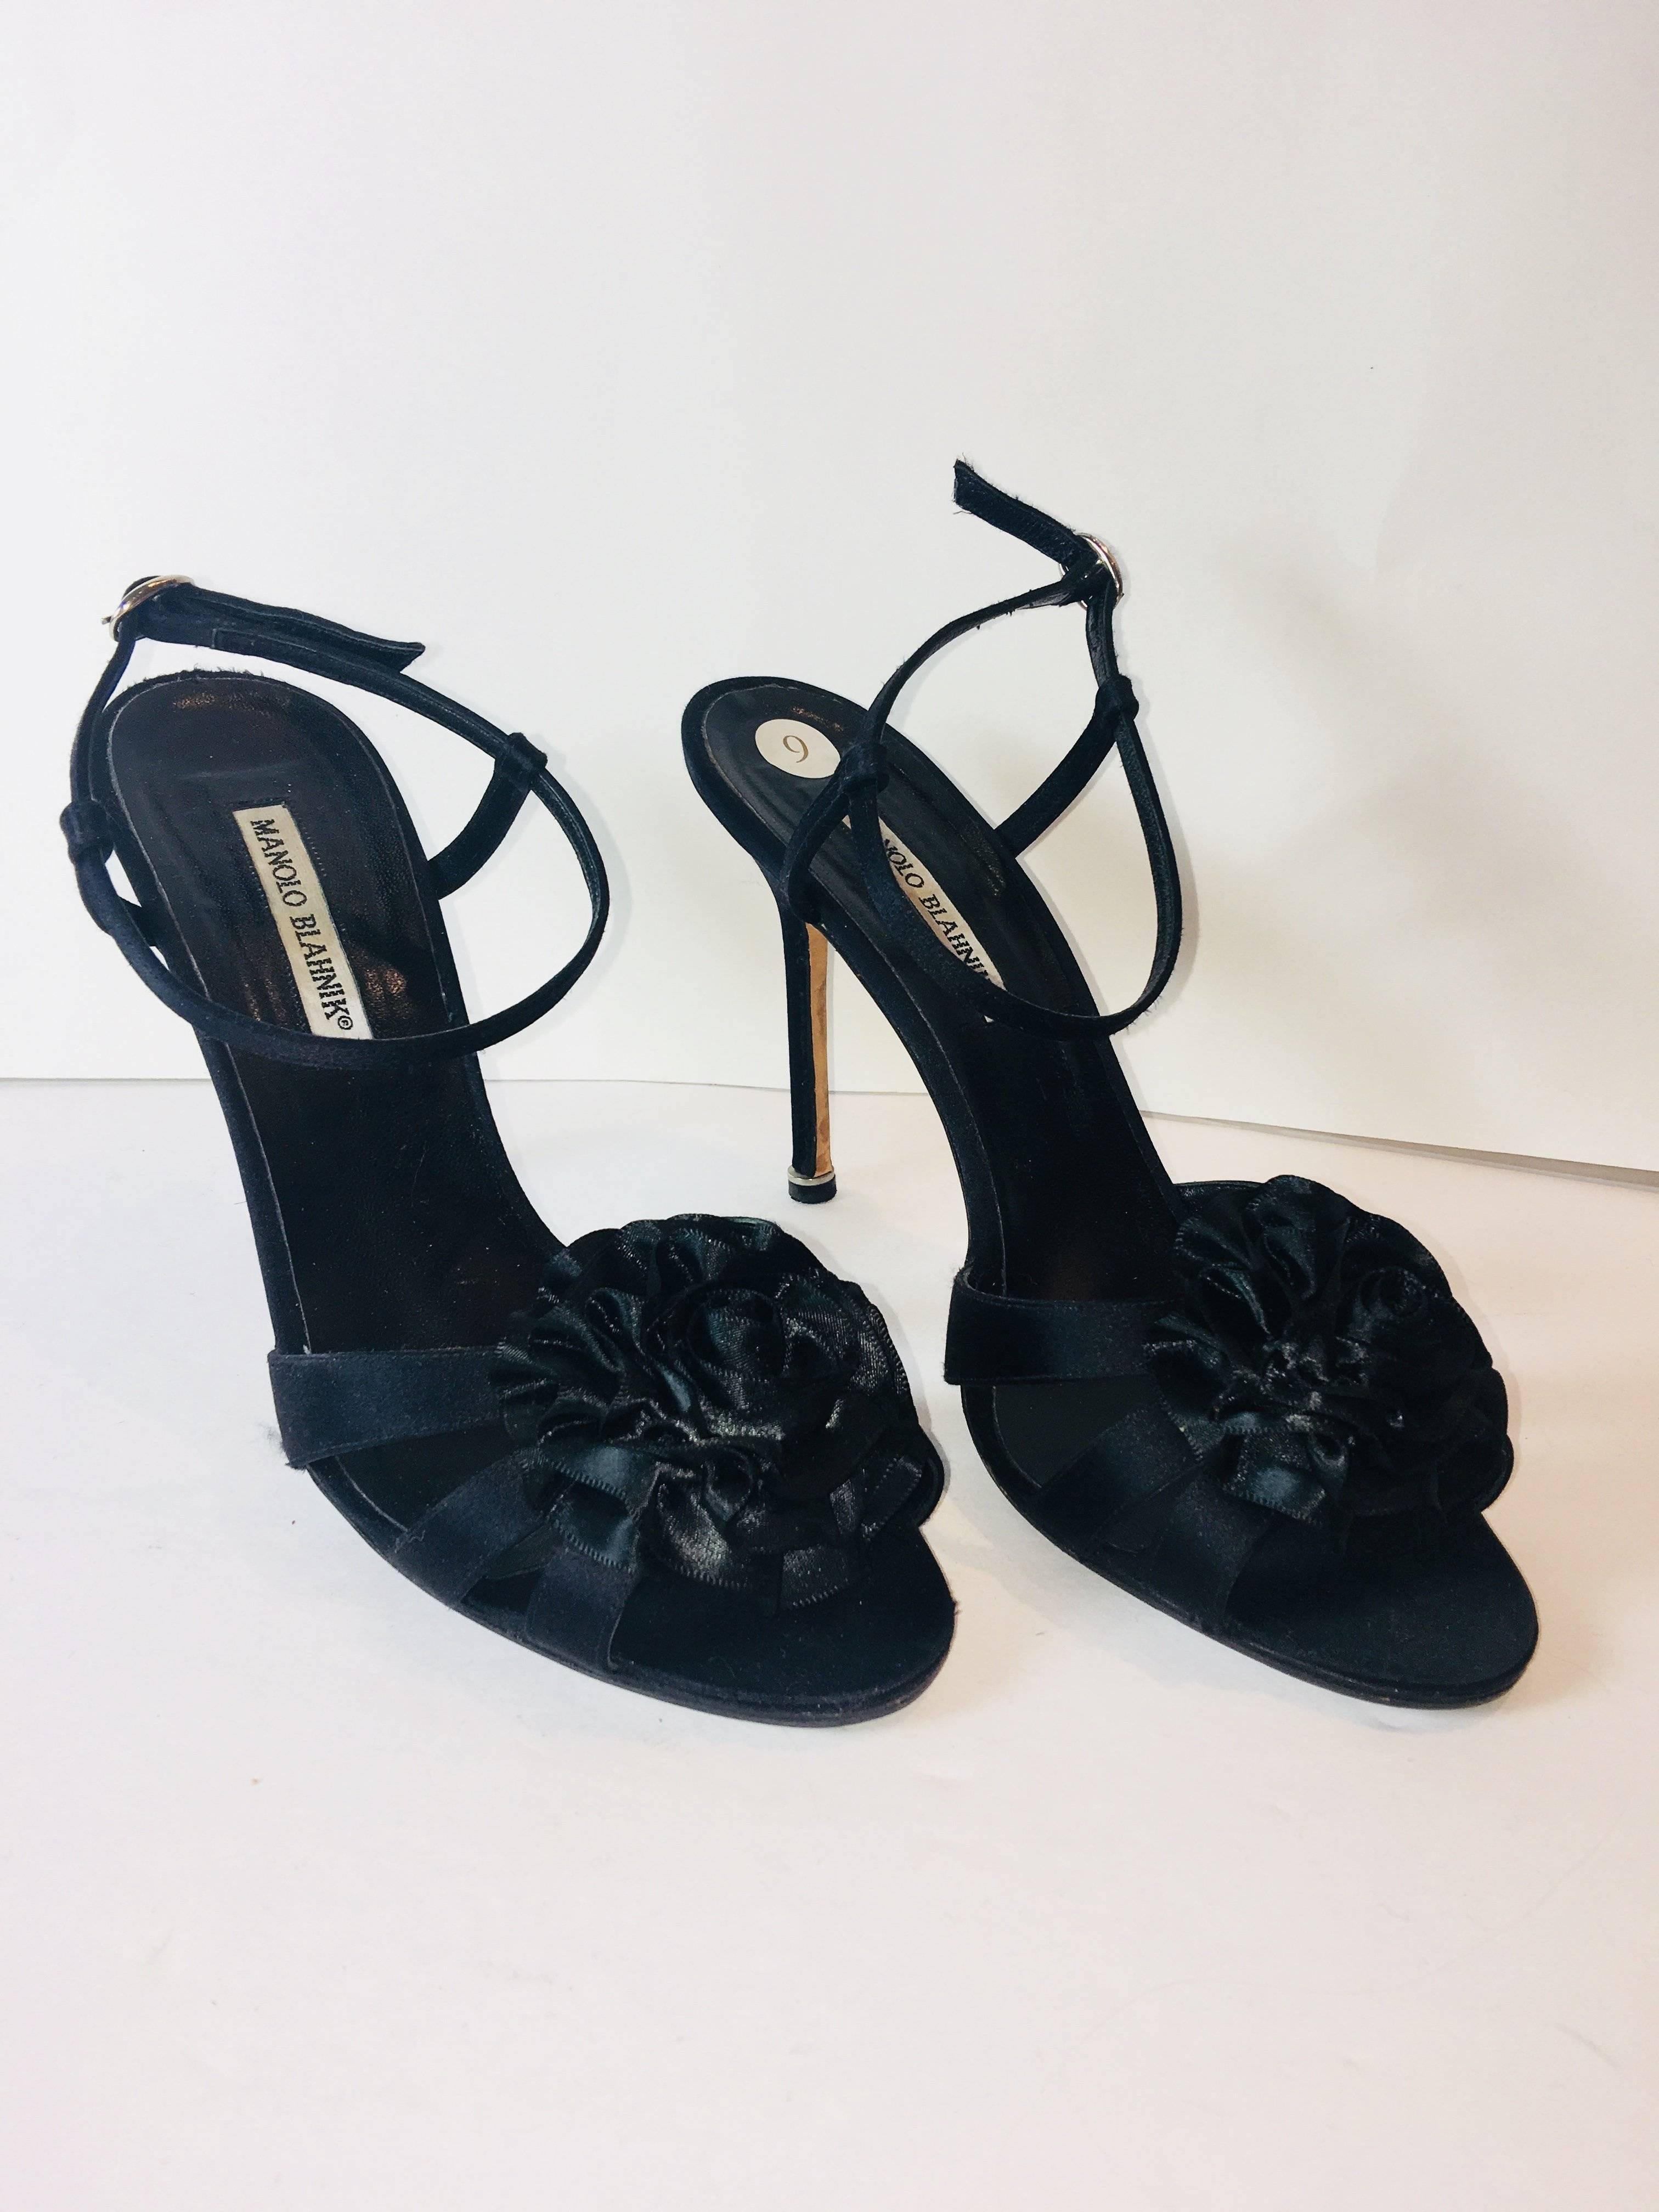 Manolo Blahnik Satin Ankle Strap Heels with Large Flower At Toe.